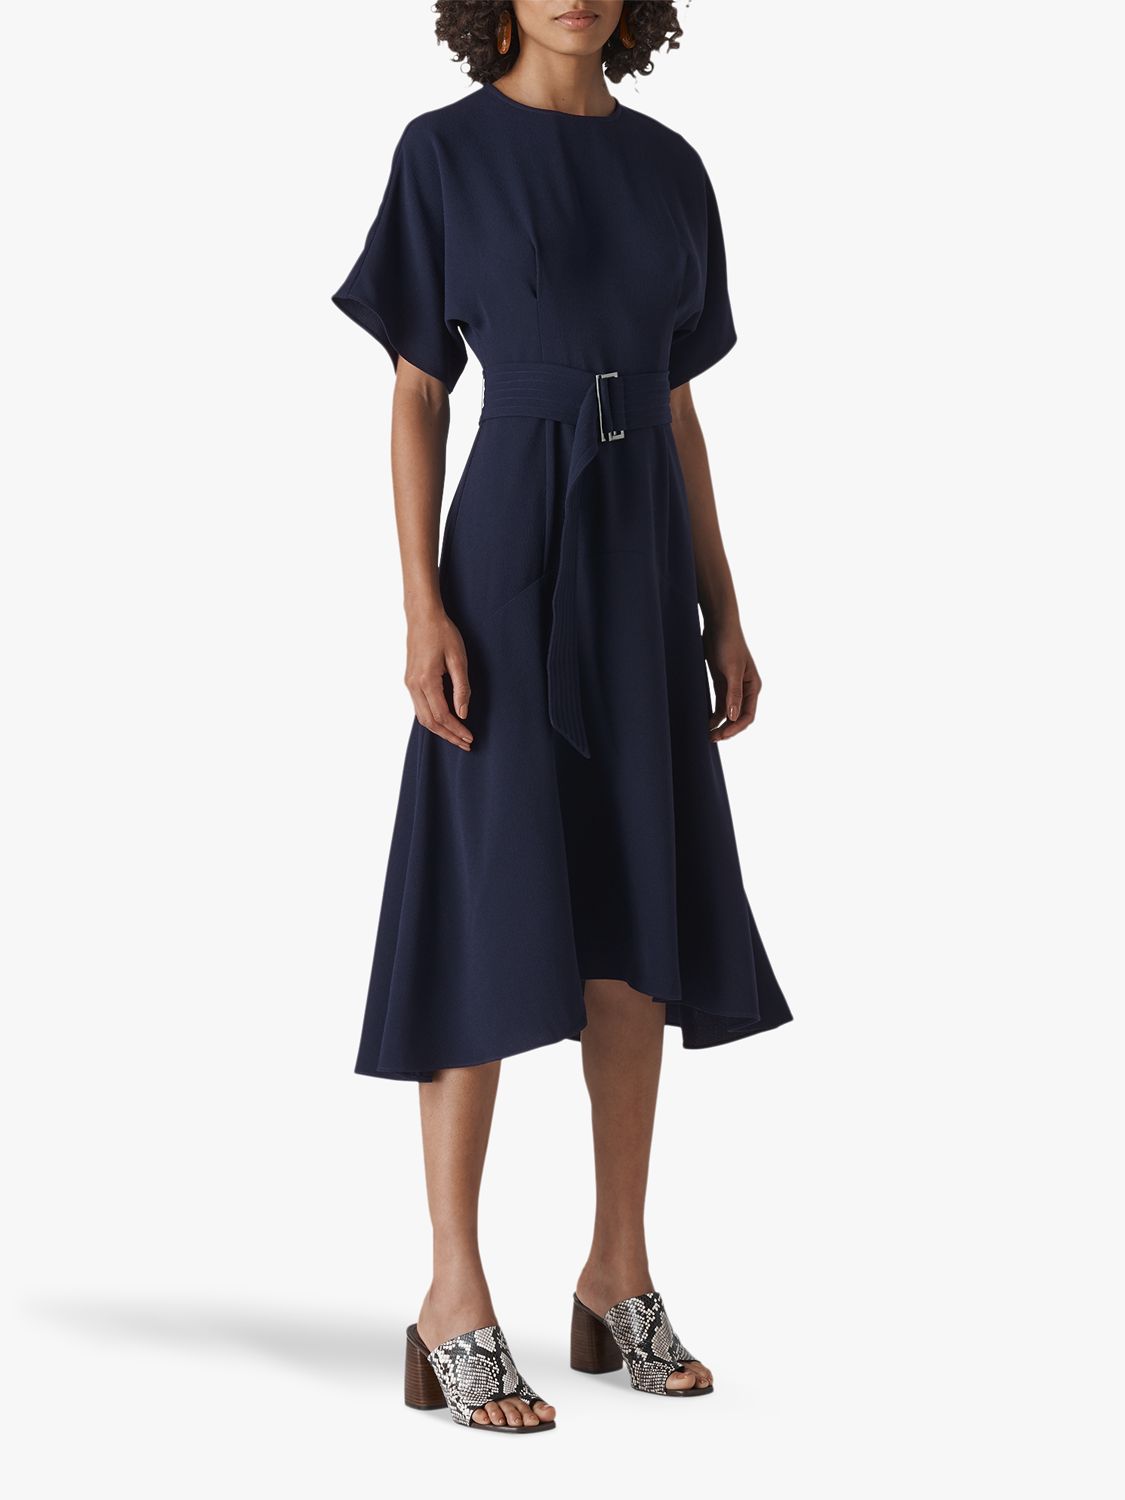 Whistles Belted Flared Midi Dress, Navy at John Lewis & Partners